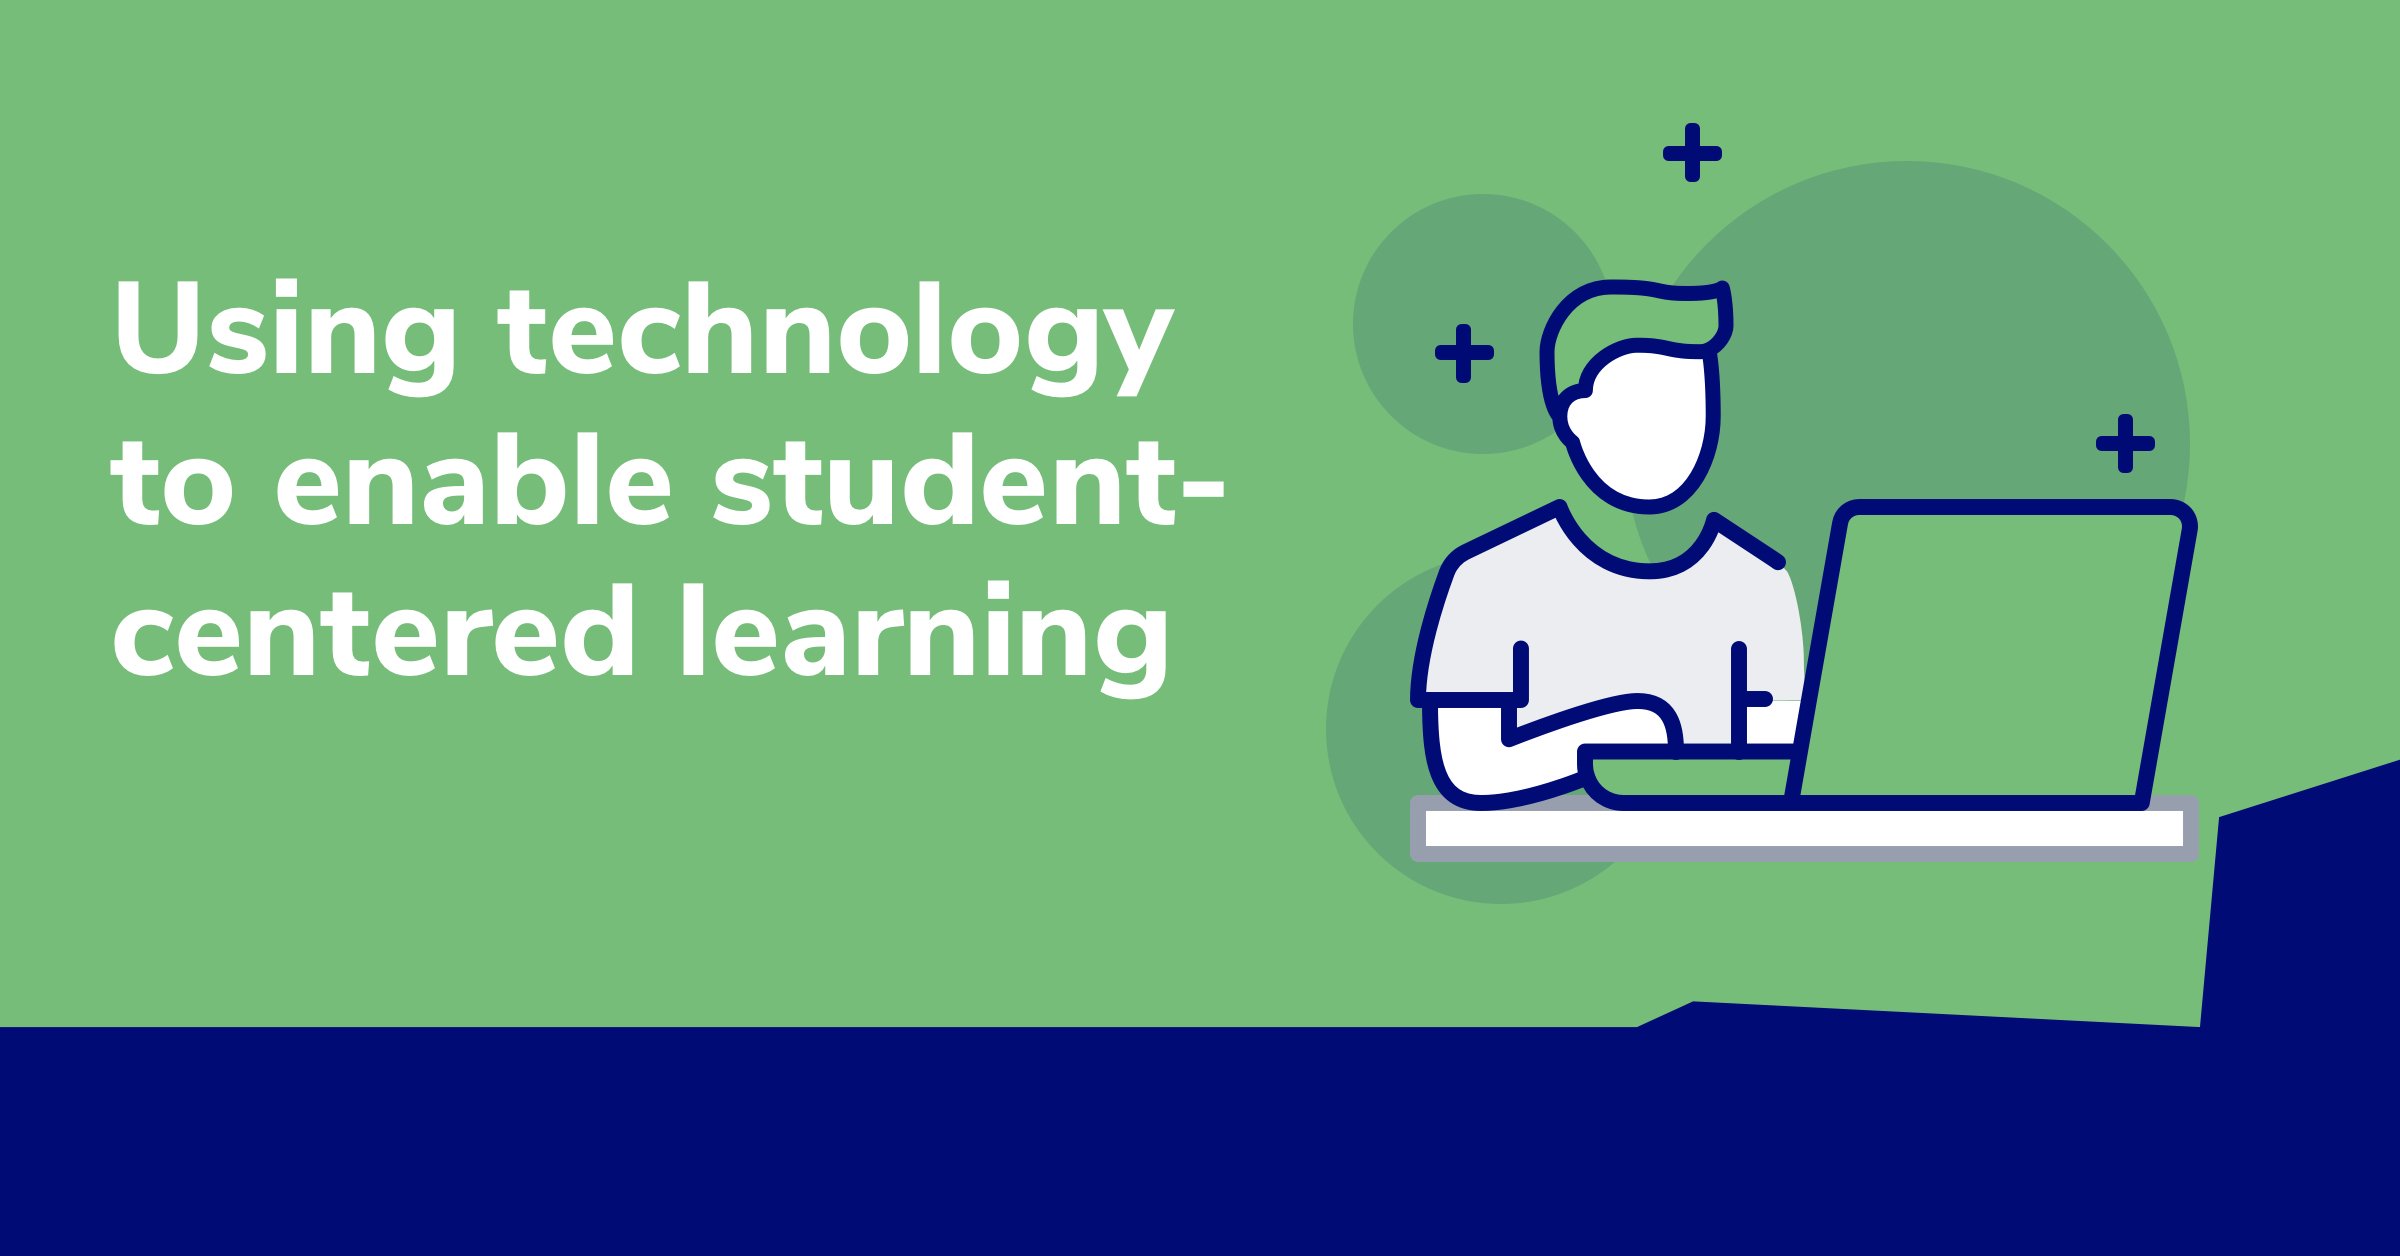 Using technology to enable student-centered learning